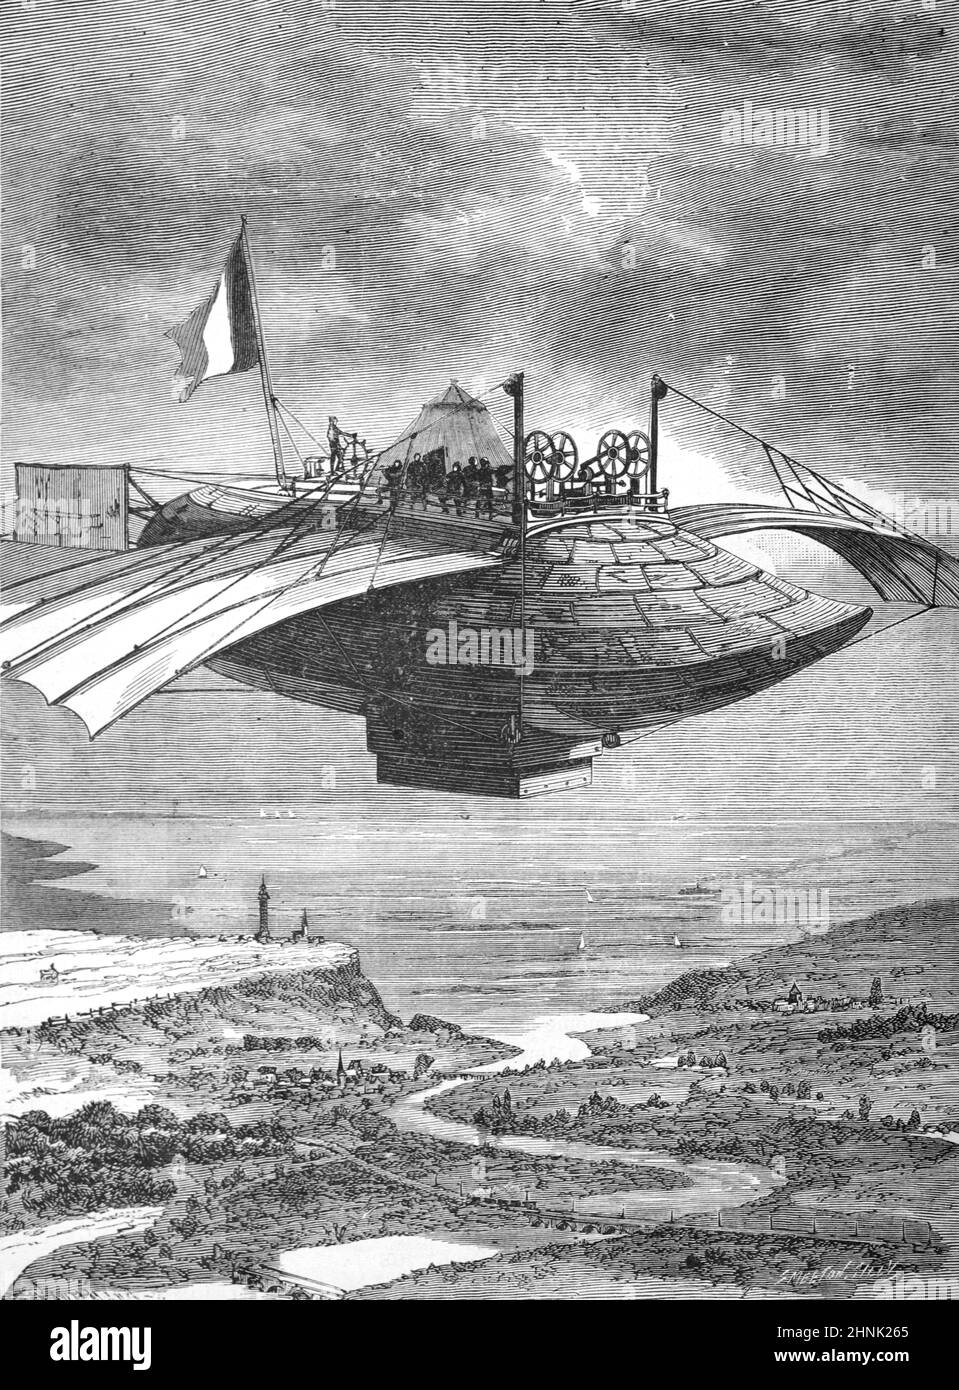 Artist's Impression of a Fantasy, Surreal or Futuristic Early French Flying Machine known as The Celeste France. Vintage Illustration or Engraving 1883 Stock Photo